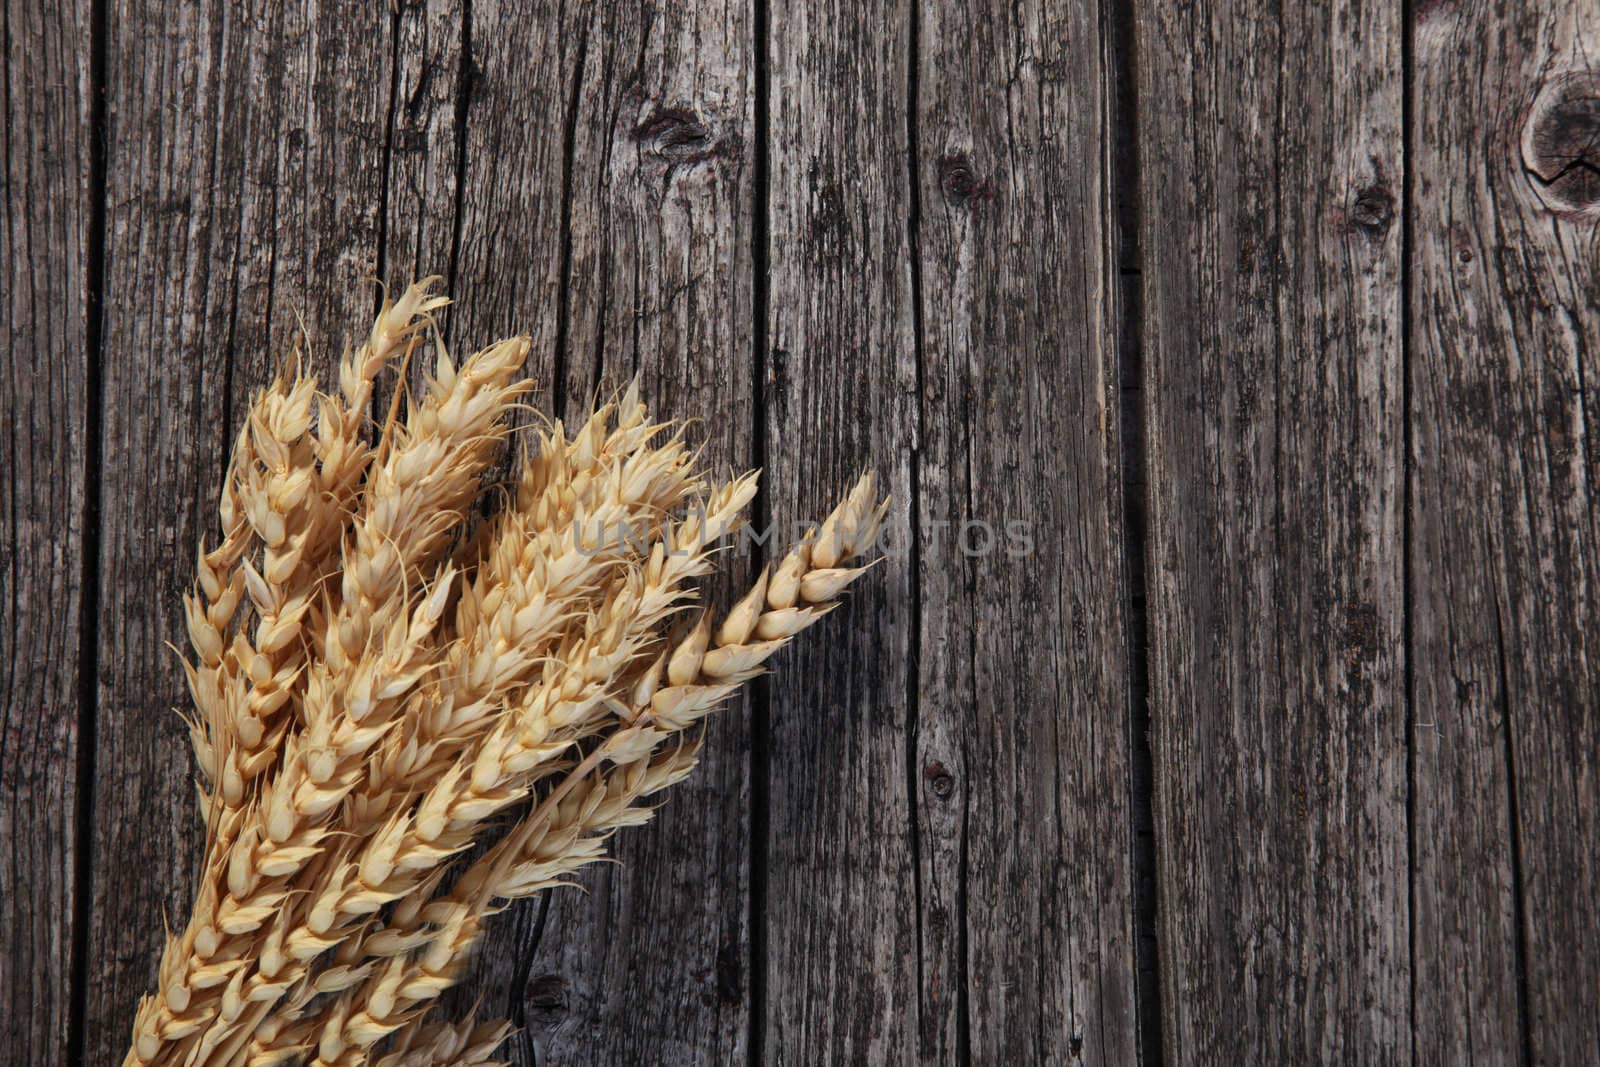 Bunch of ripe golden wheat on a weathered wooden plank background with cracks, texture and copy space